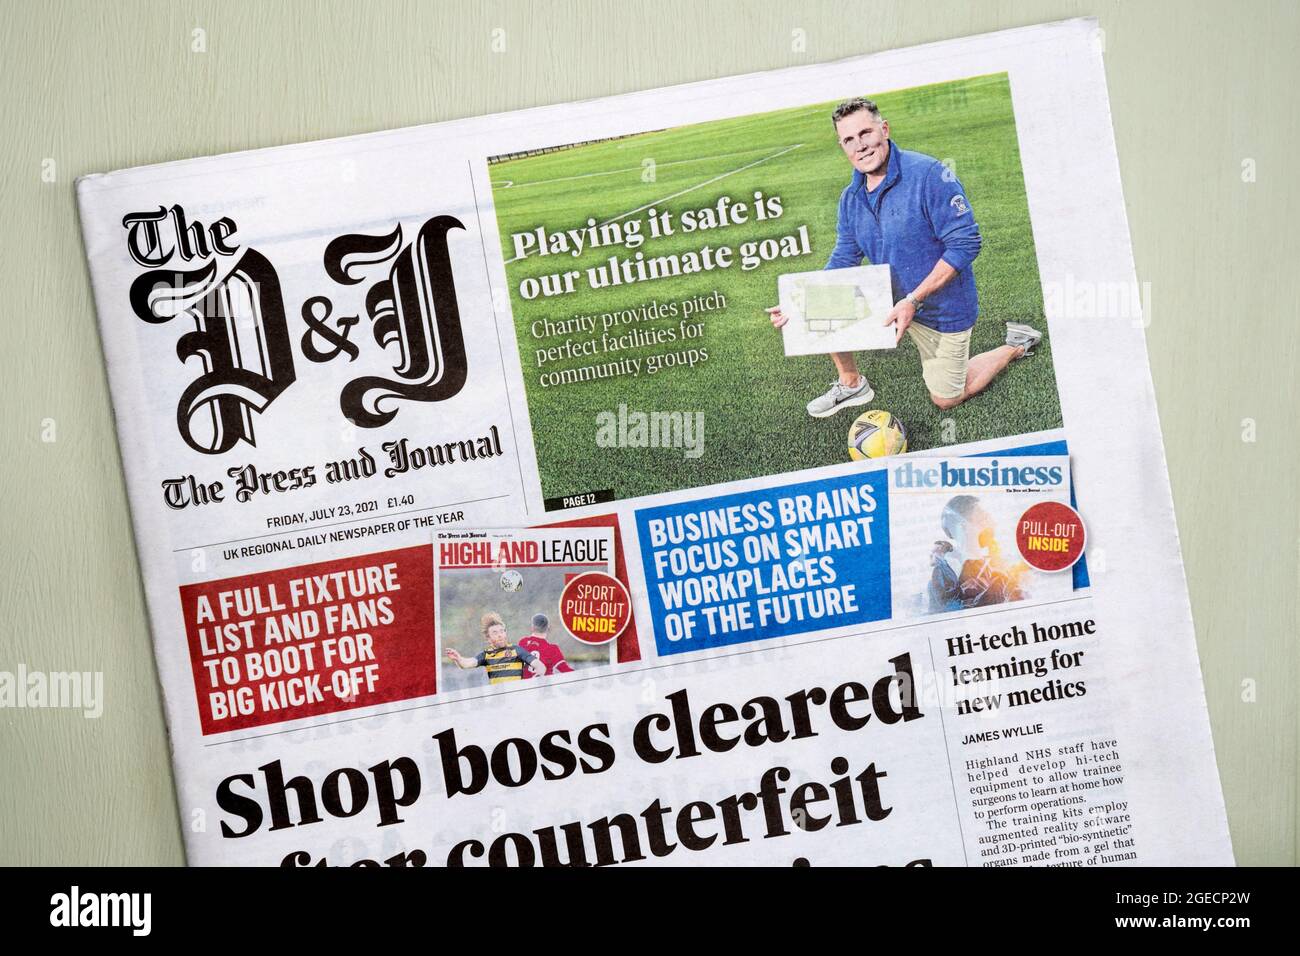 The Press & Journal is Scotland's oldest daily paper - established in 1747. Stock Photo